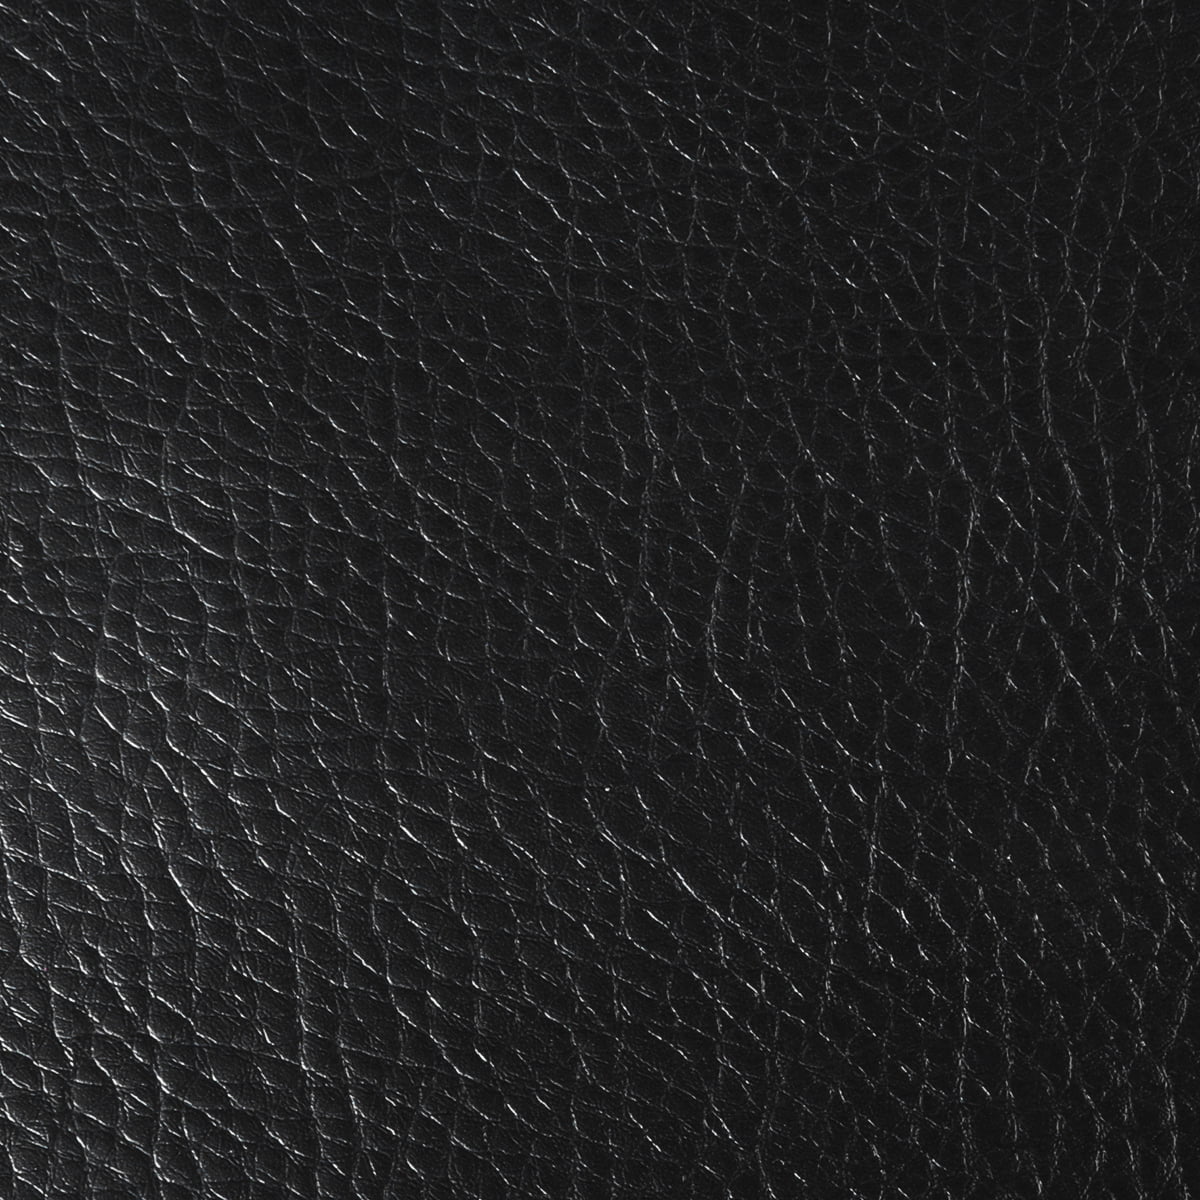 3 Yards 54 Wide Vinyl Fabric Thick Marine Grade Faux Leather Fabric Heavy  Duty PU Leather Fabric Cotton Back Home Decor Fabric for Hand Crafts DIY